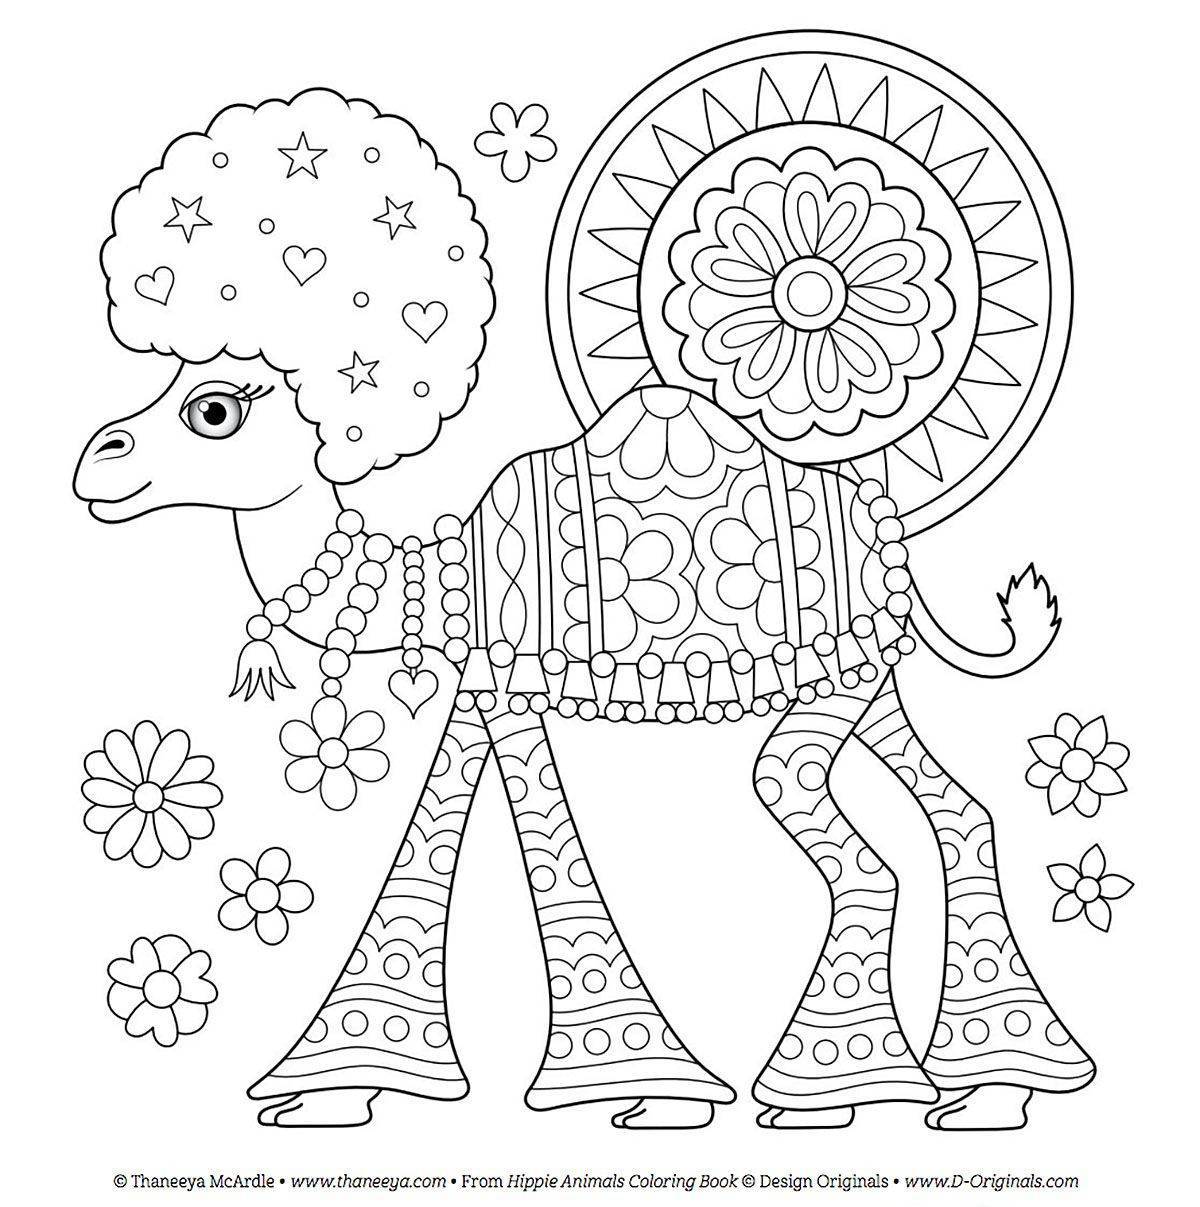 Exciting unusual coloring book